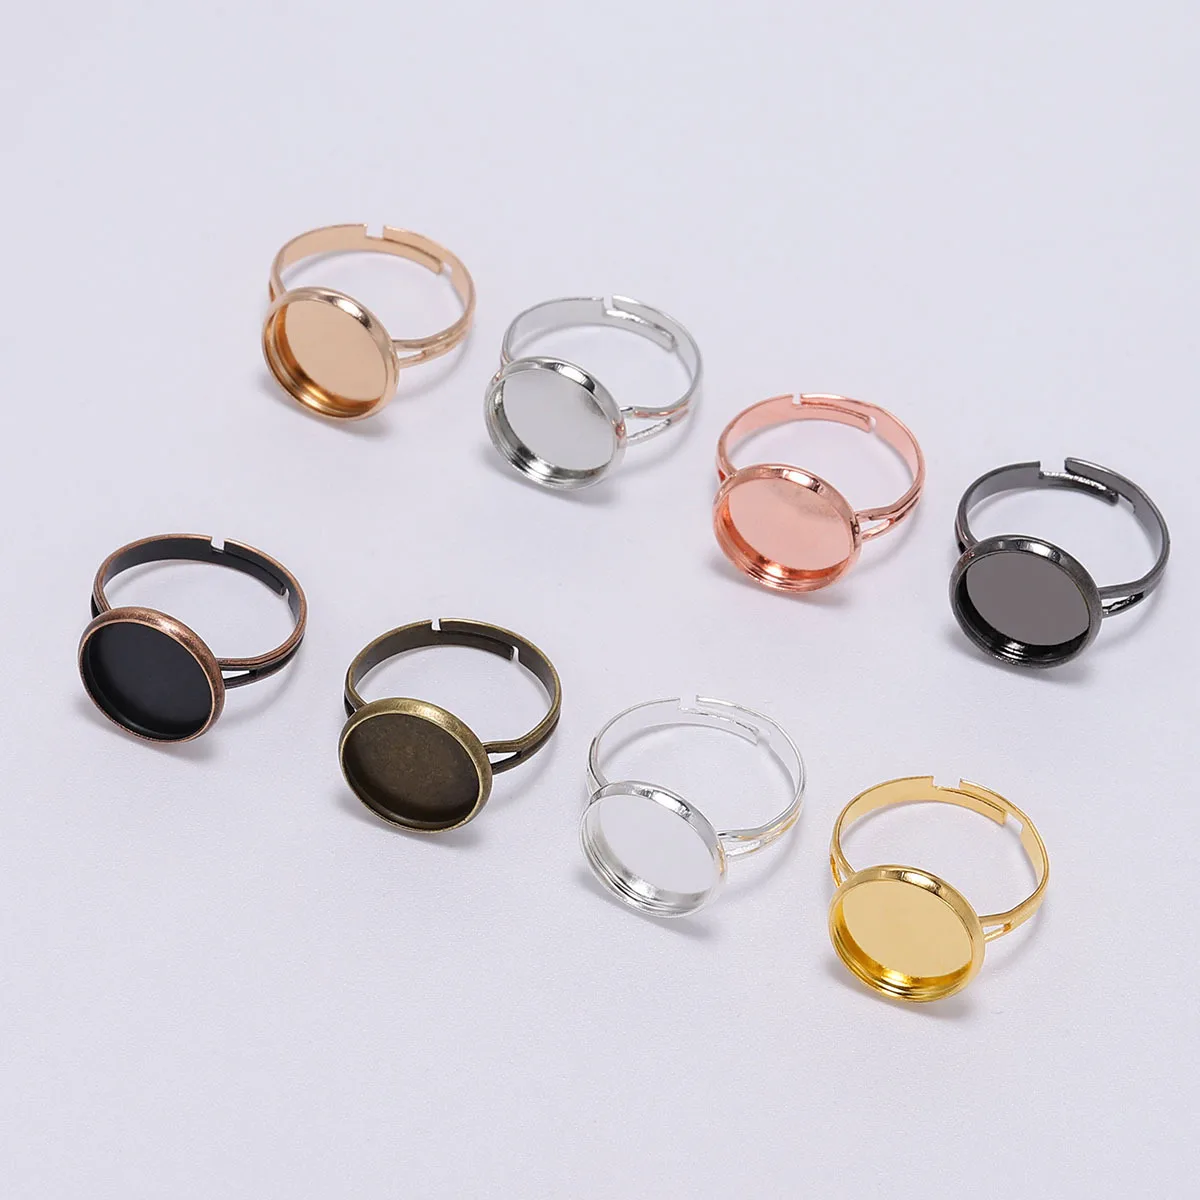 

10pcs/lot Adjustable Blank Ring Base Fit Dia 10 12 14 16 18 20 mm Glass Cabochons Cameo Settings Tray Diy Jewelry Making Ring